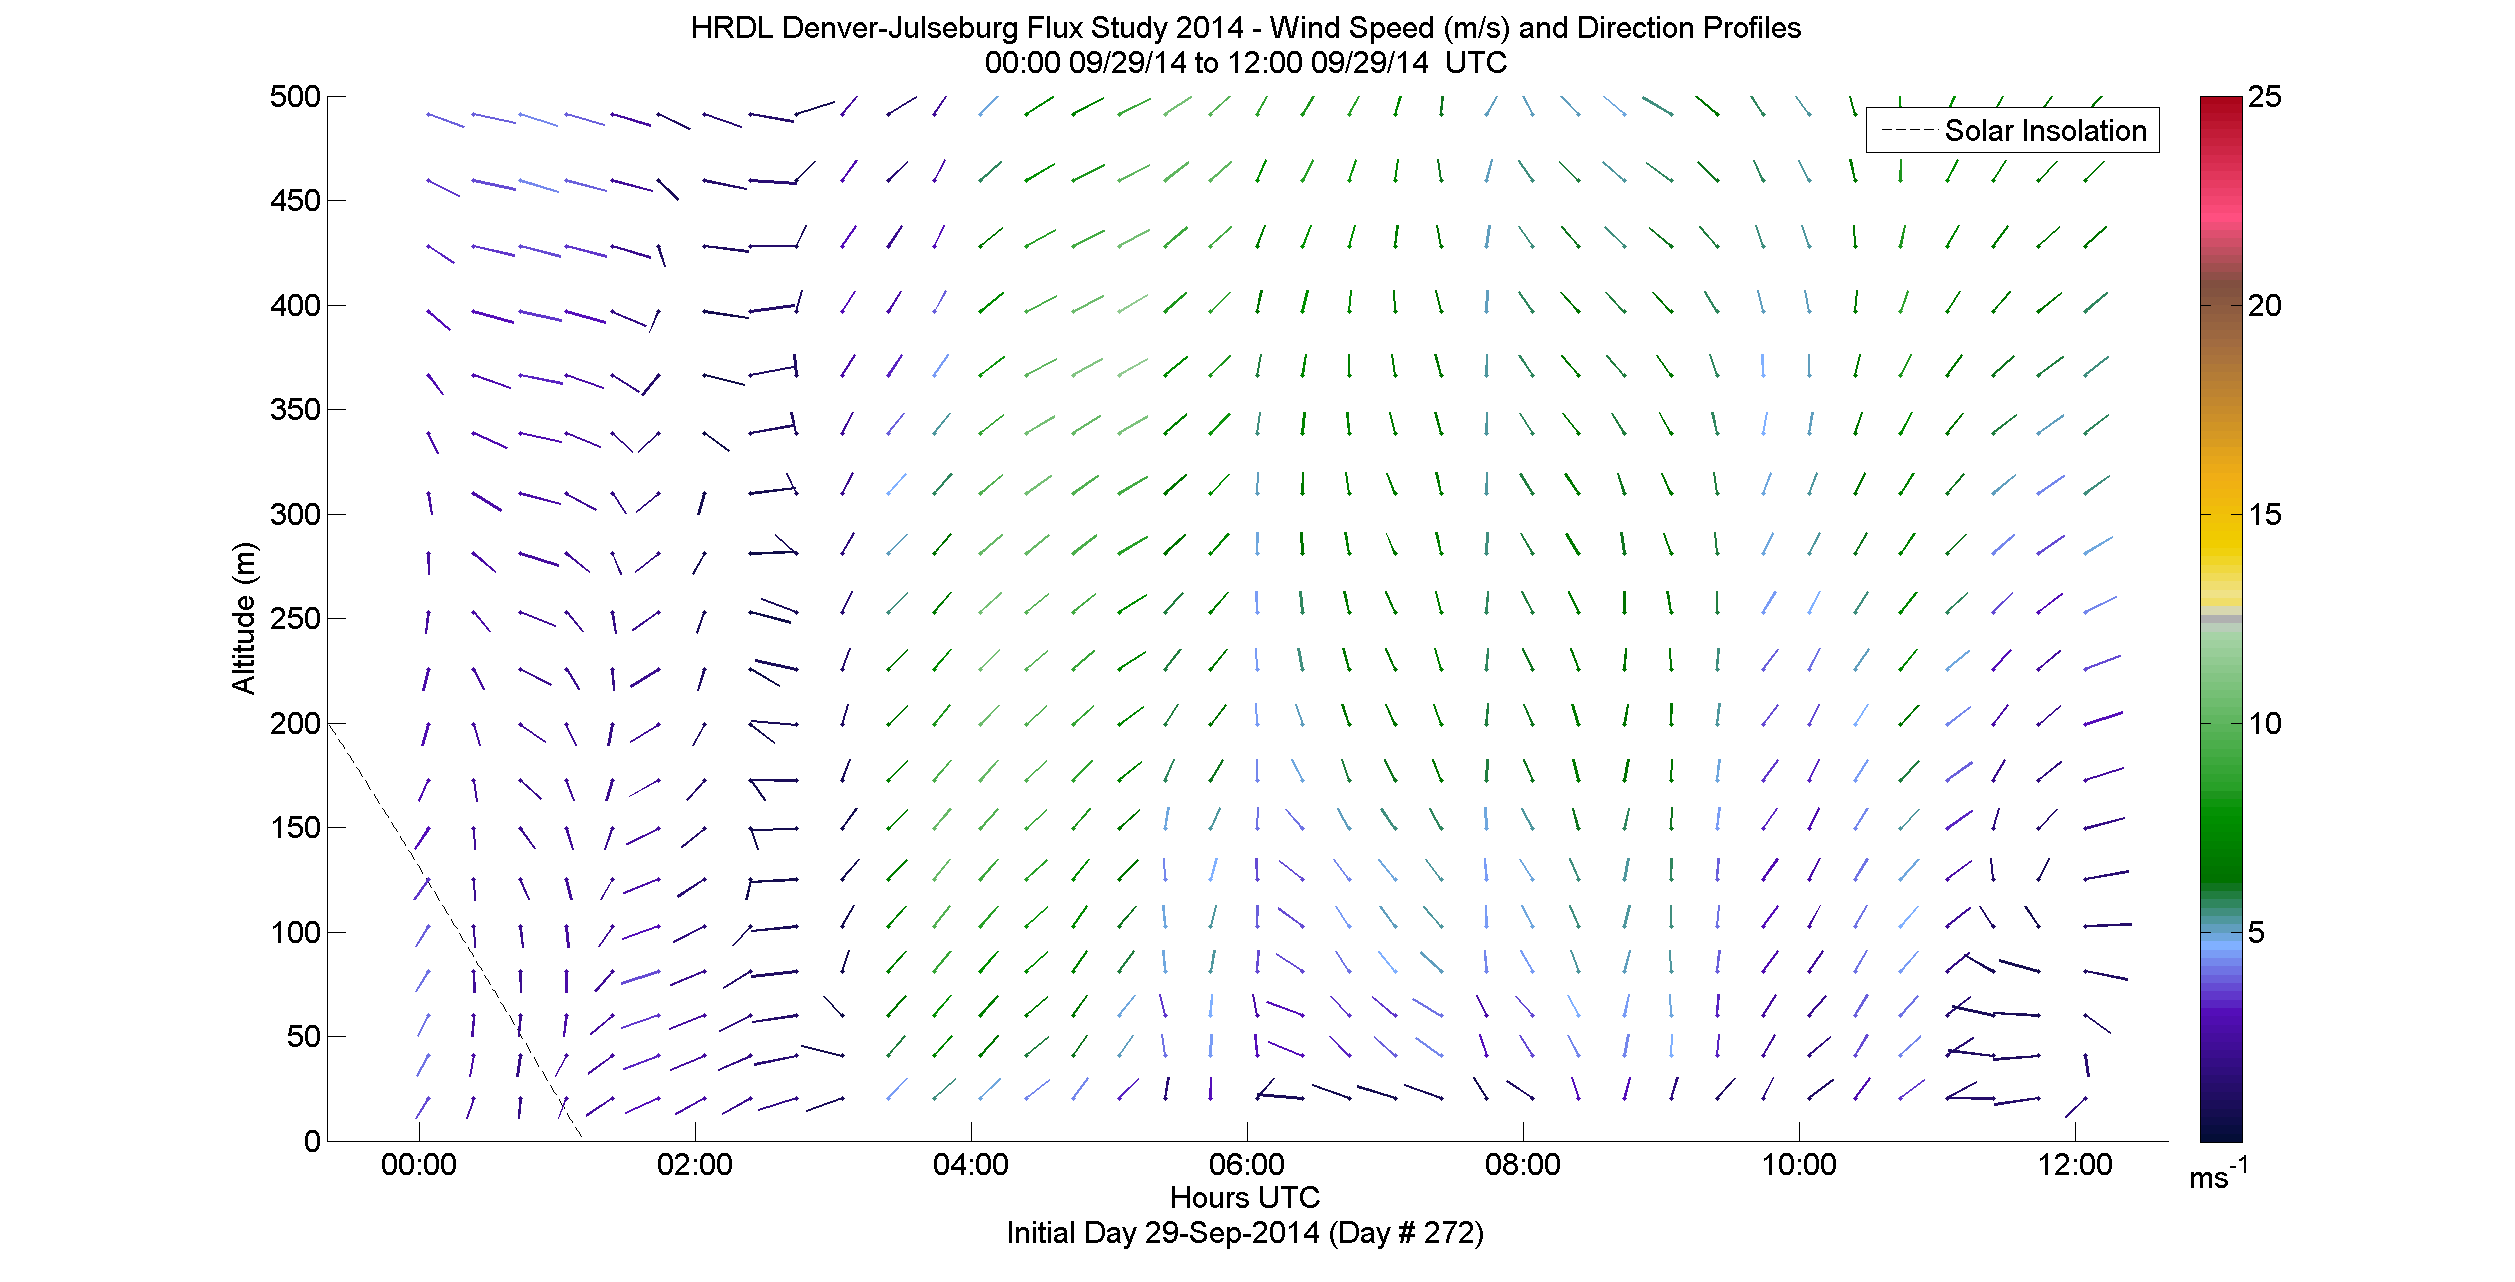 HRDL speed and direction profile - September 29 am